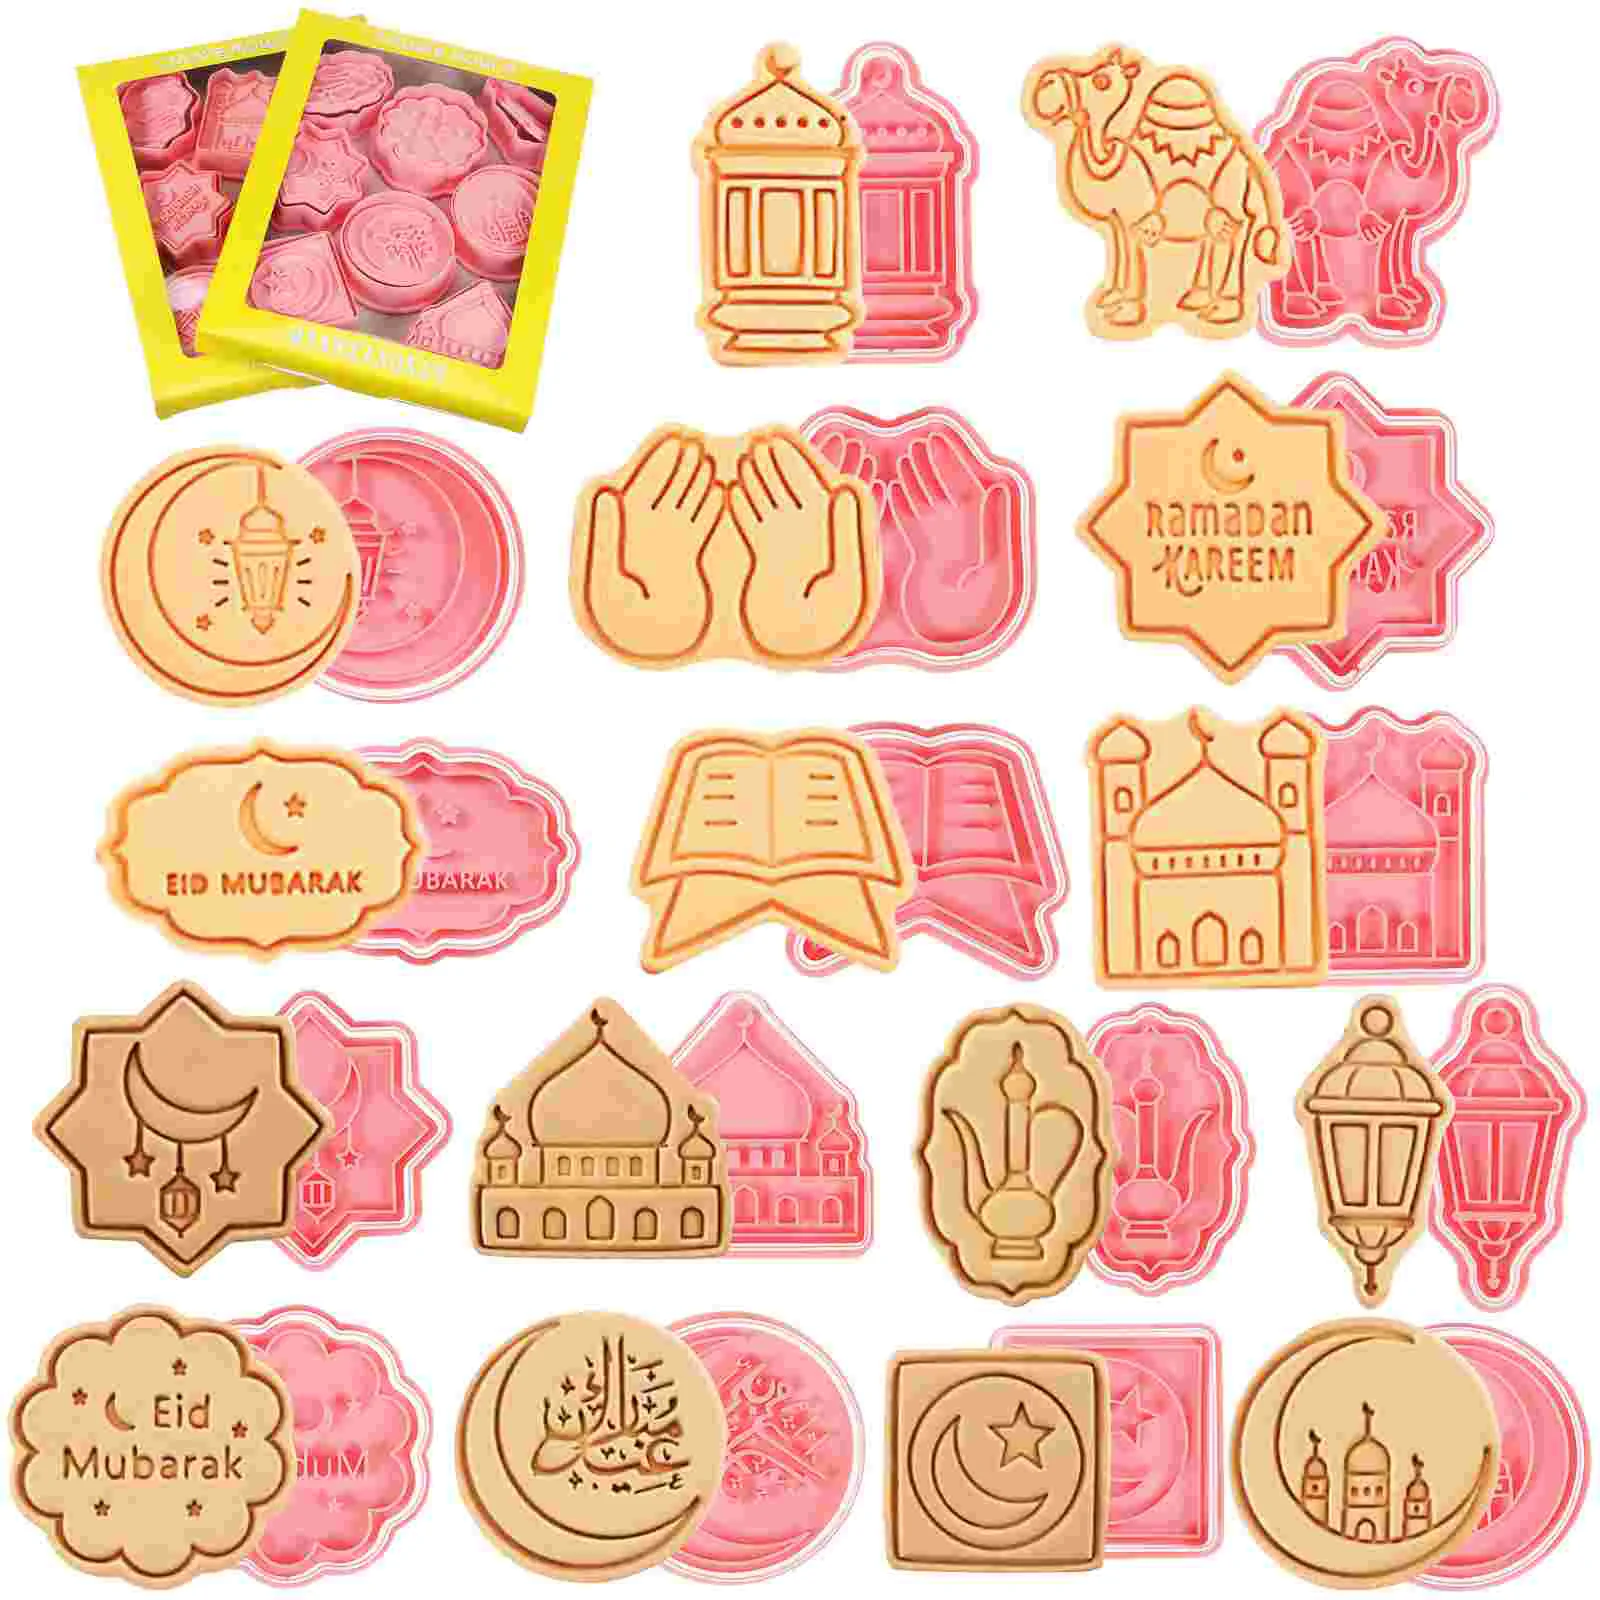 

16 Pcs Eid Cookie Cutters Mubarak Cookie Mold Fondant Biscuit Tool Cookie Stamp For Baking